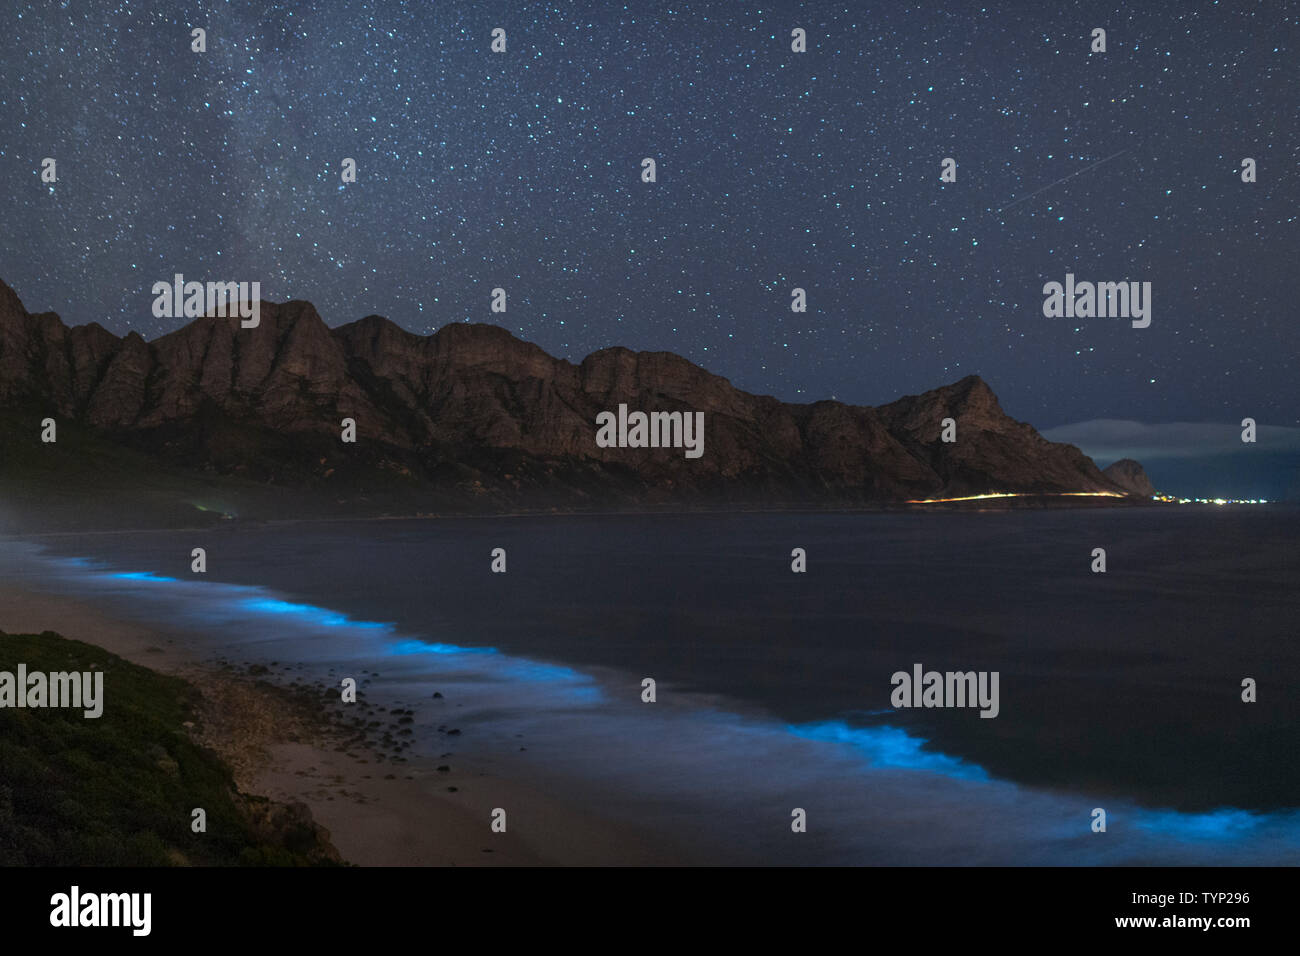 Bioluminescent phytoplankton illuminating the ocean along the coast at the Kogelberg Biosphere Reserve near Cape Town, South Africa. Stock Photo